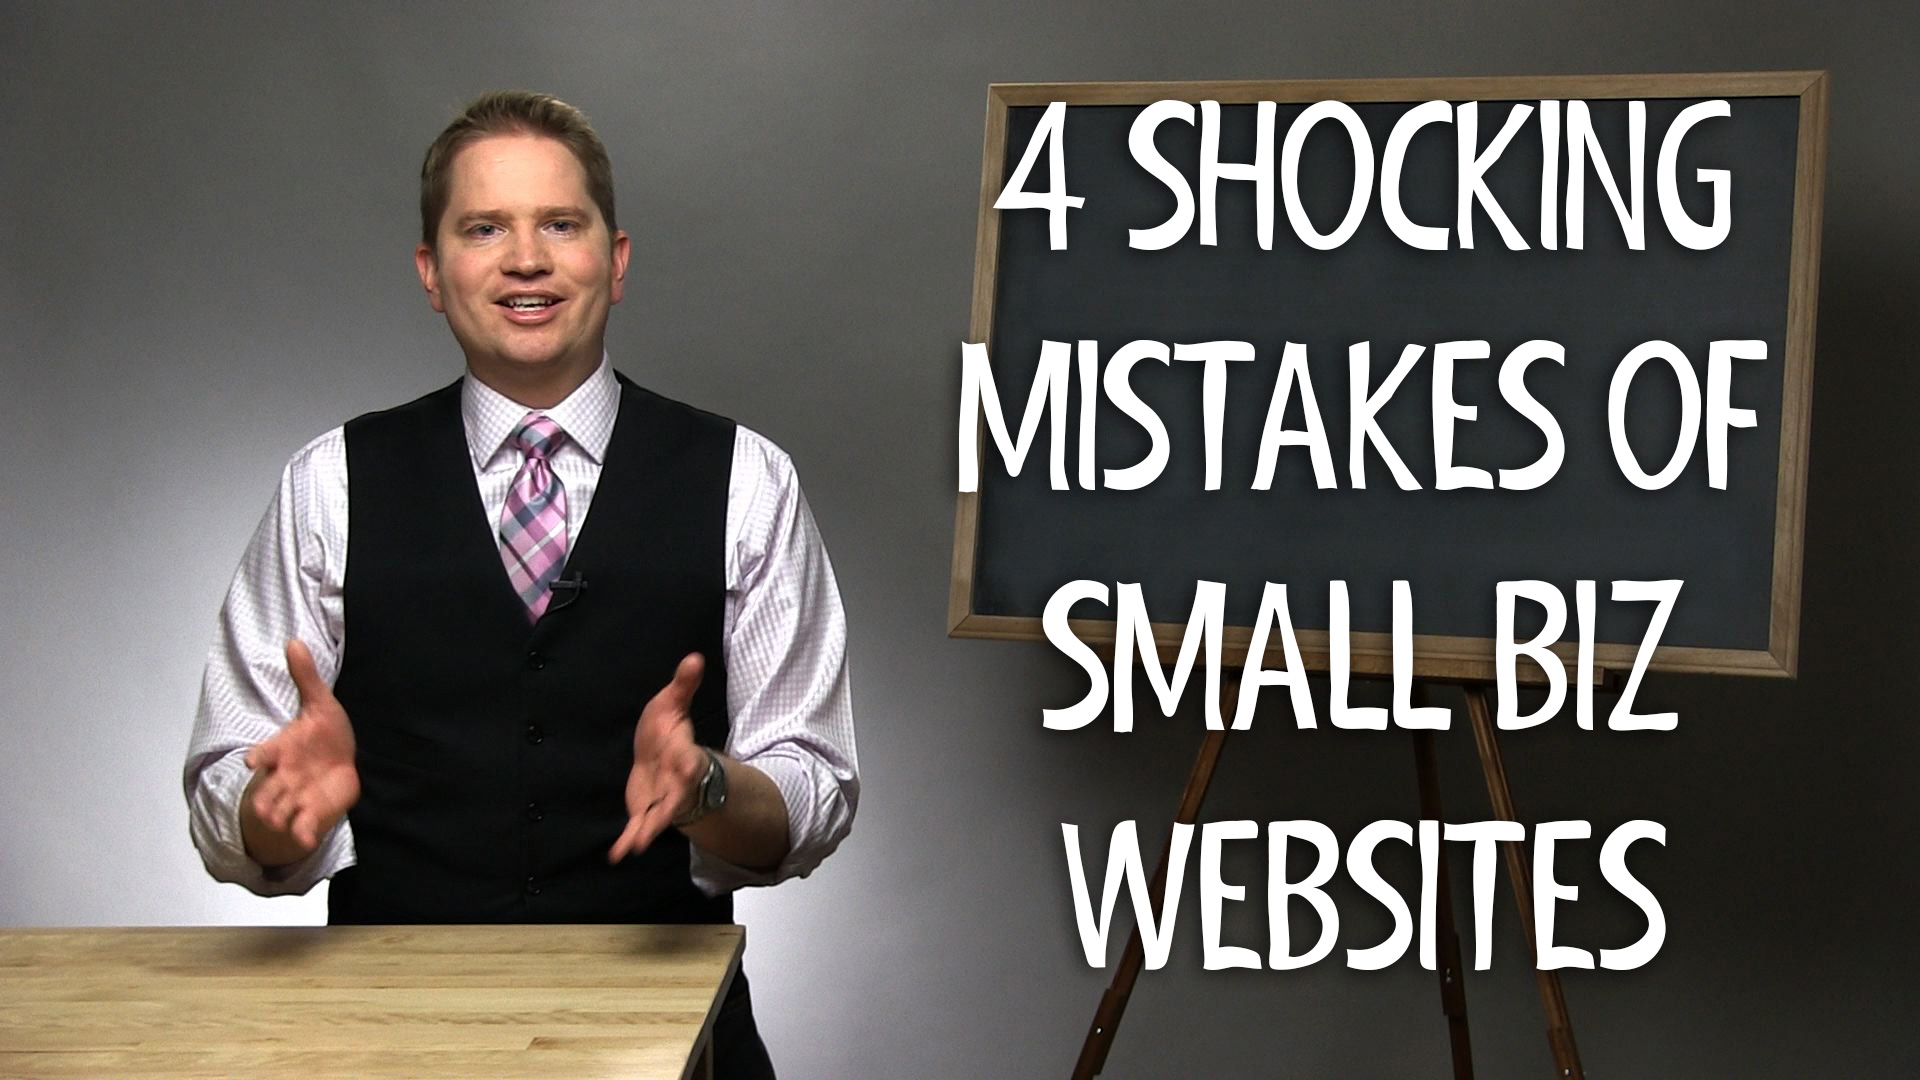 4 Shocking Mistakes of Small Business Websites: Are you missing out on sales?